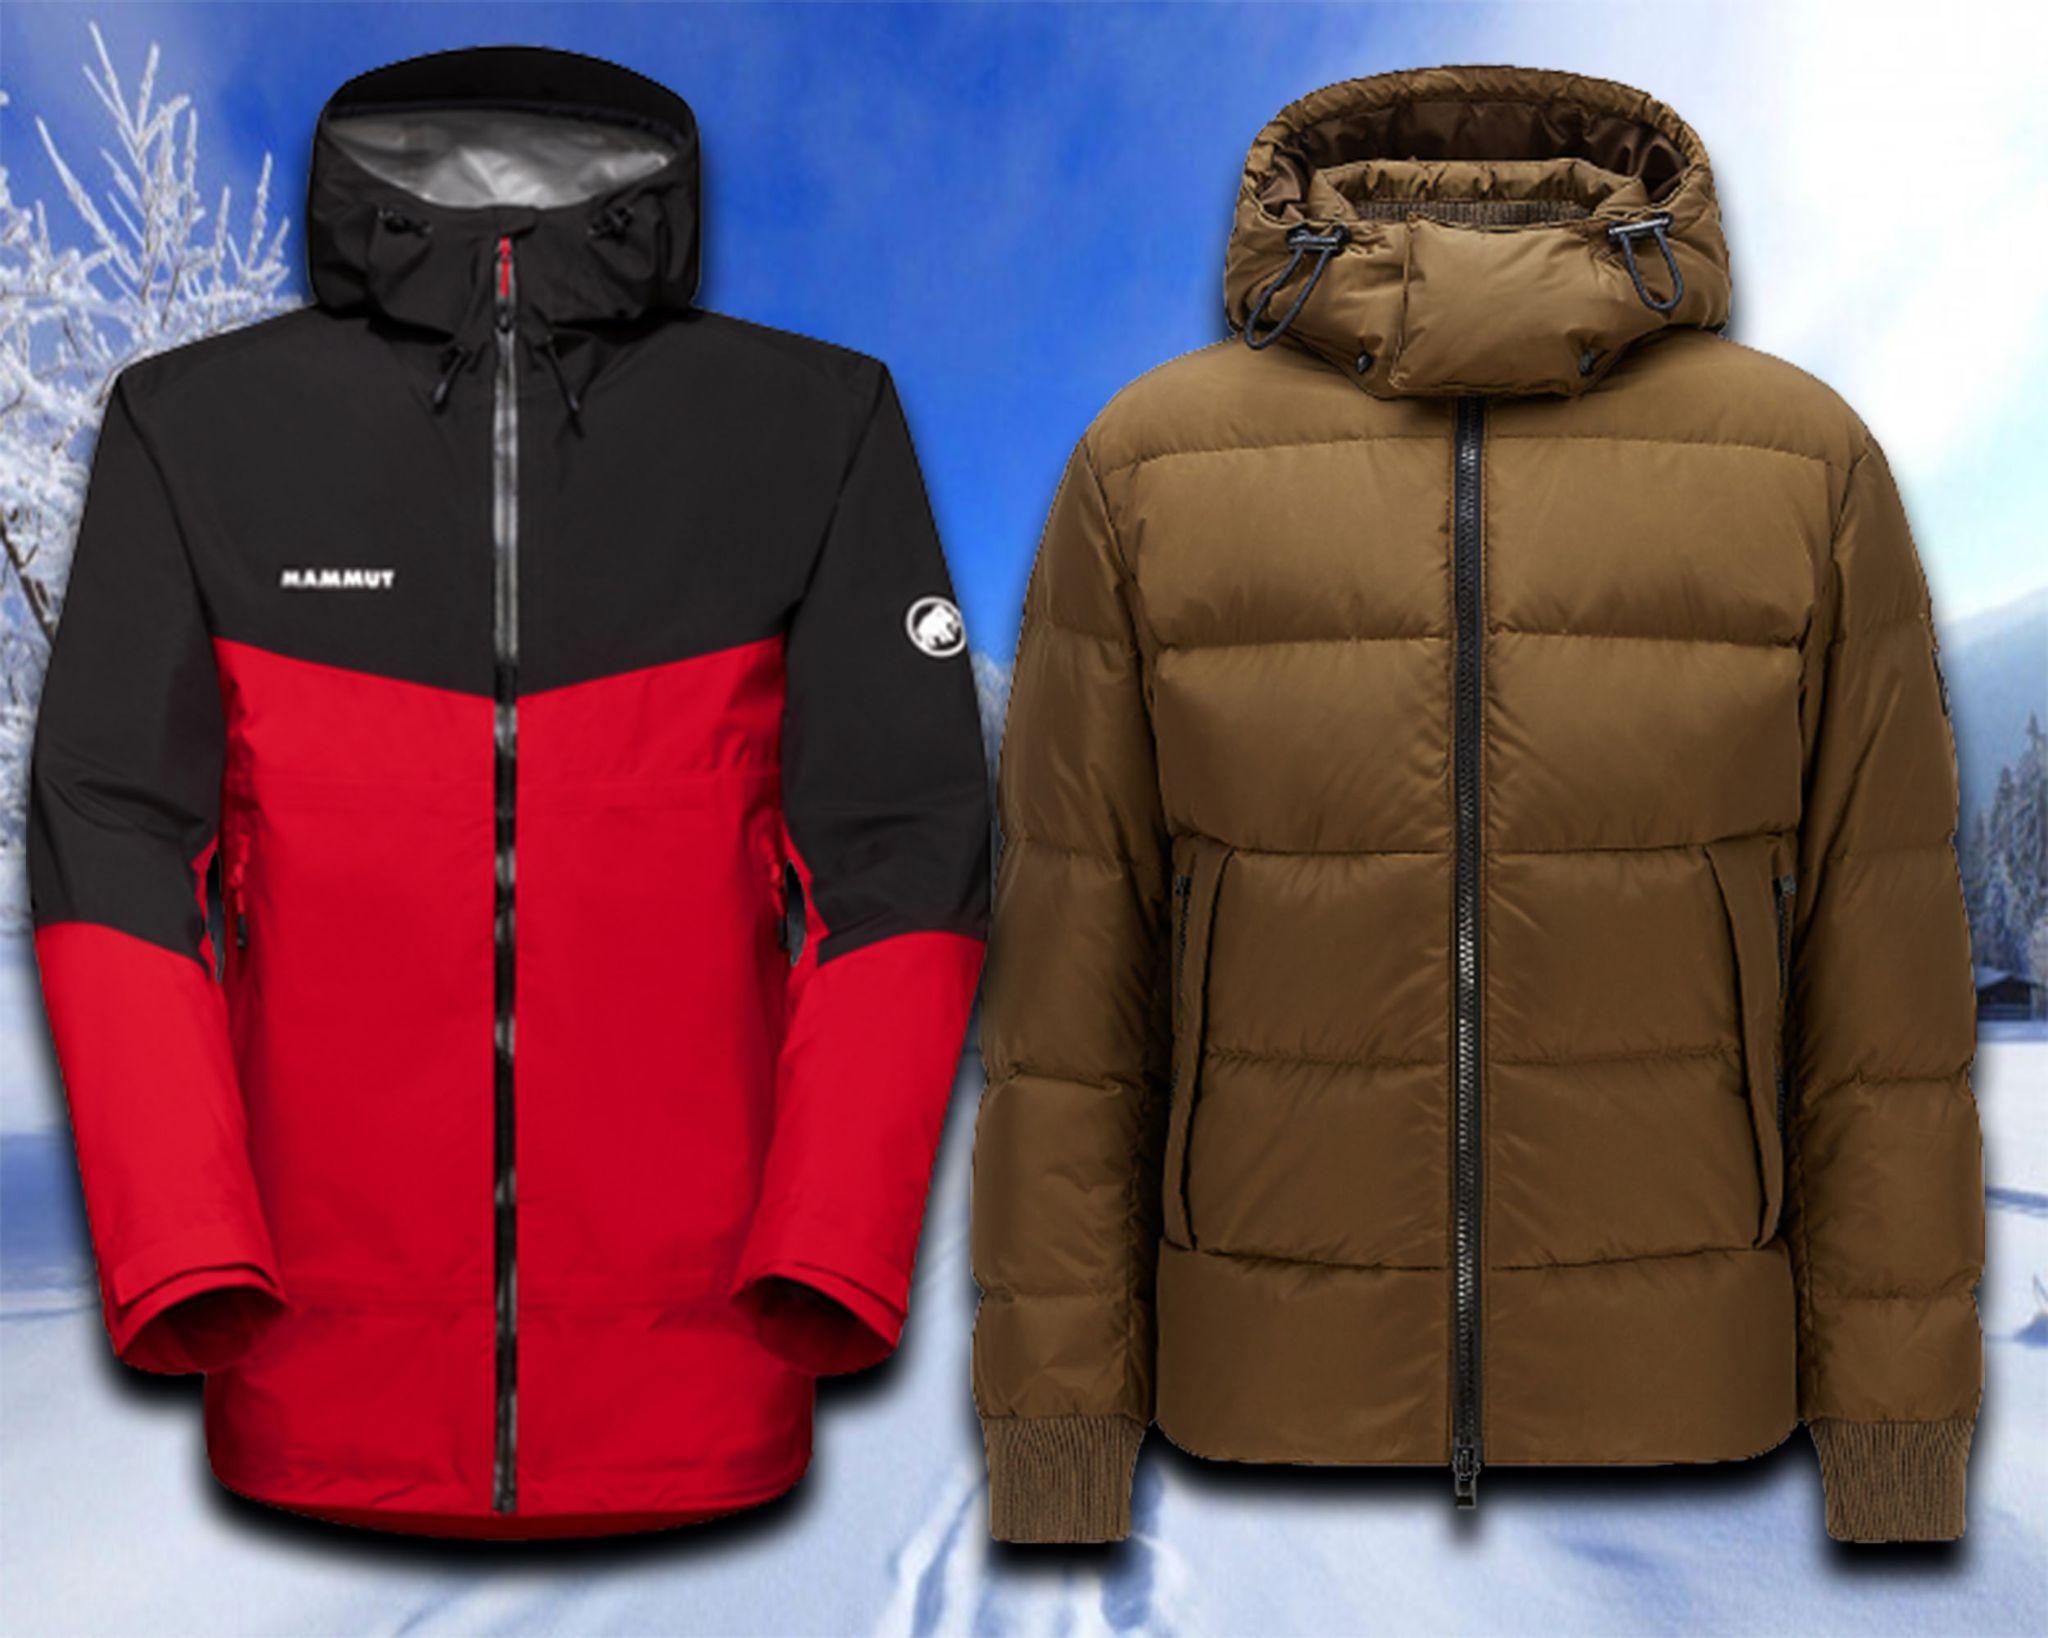 BEST COATS FOR MEN TO STAY WARM AND DRY IN